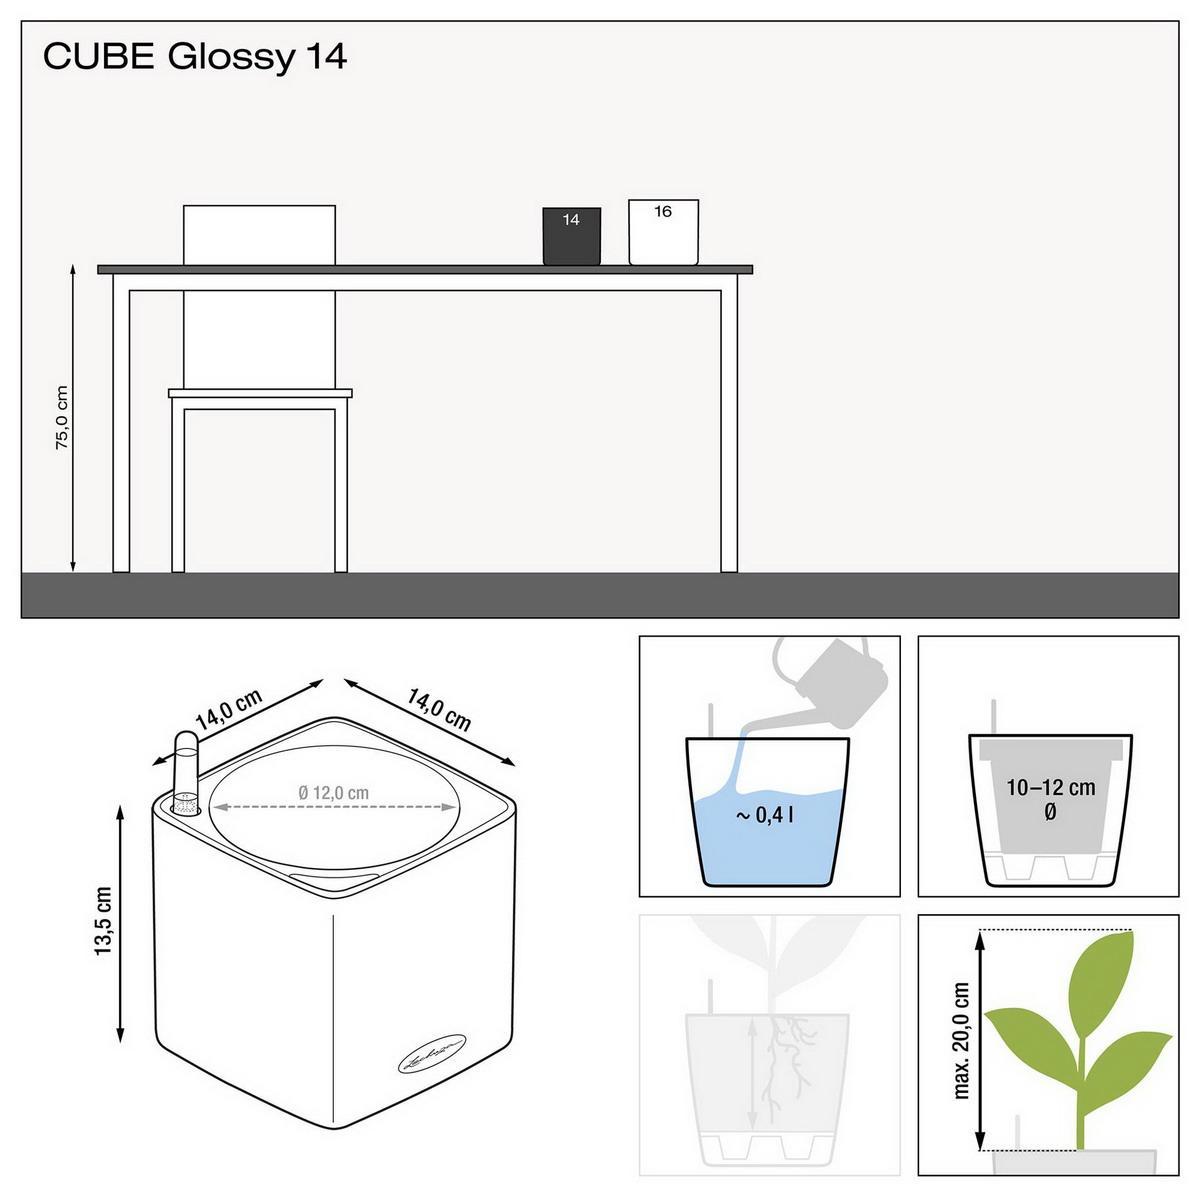 LECHUZA CUBE Glossy 16 Charcoal HighGloss Poly Resin Table Self-watering Planter with Water Level Indicator H16 L17 W17 cm, 1.4L - citiplants.com